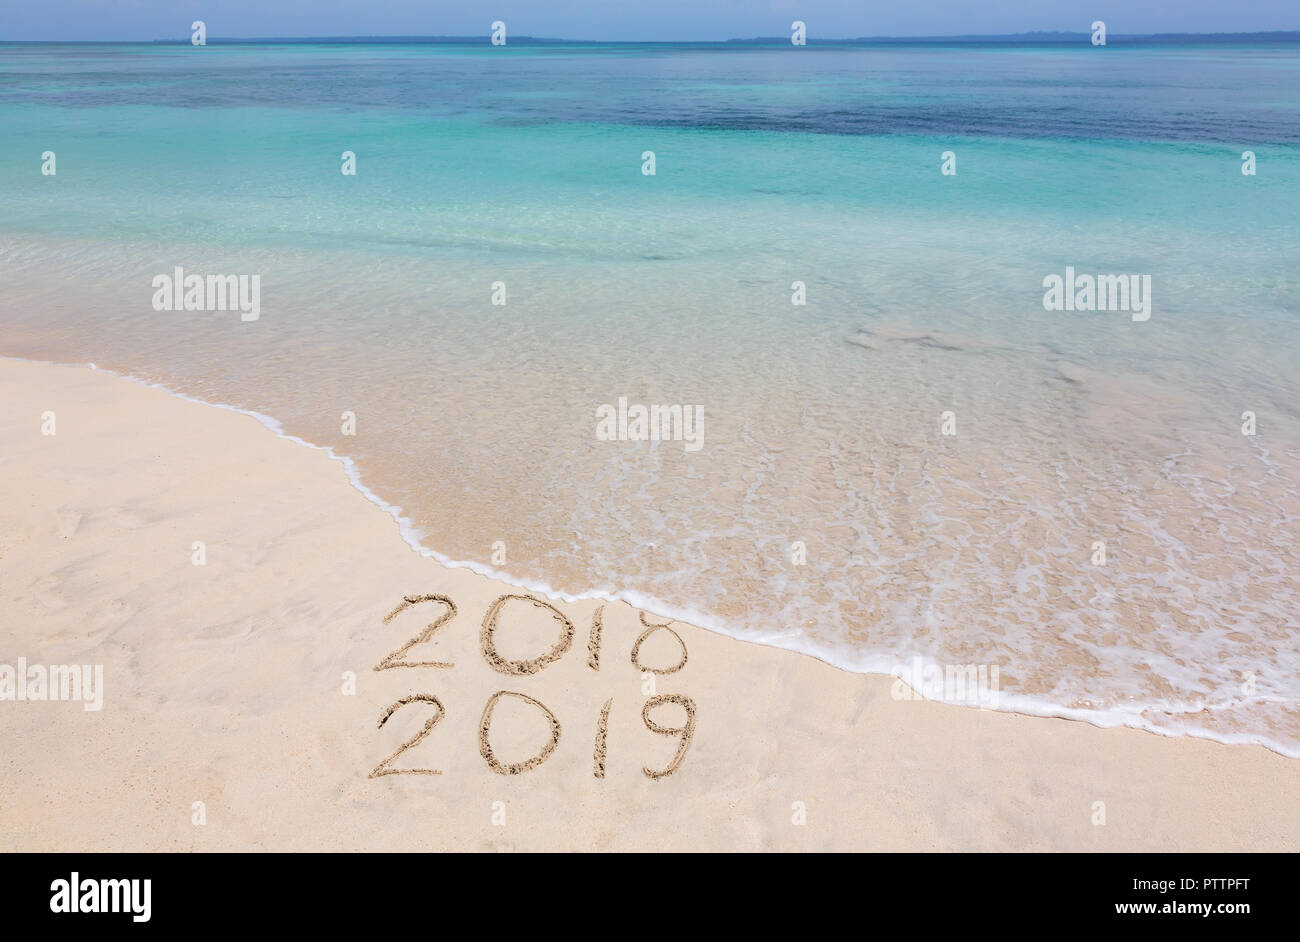 Year 2018 is washed away by ocean wave Stock Photo